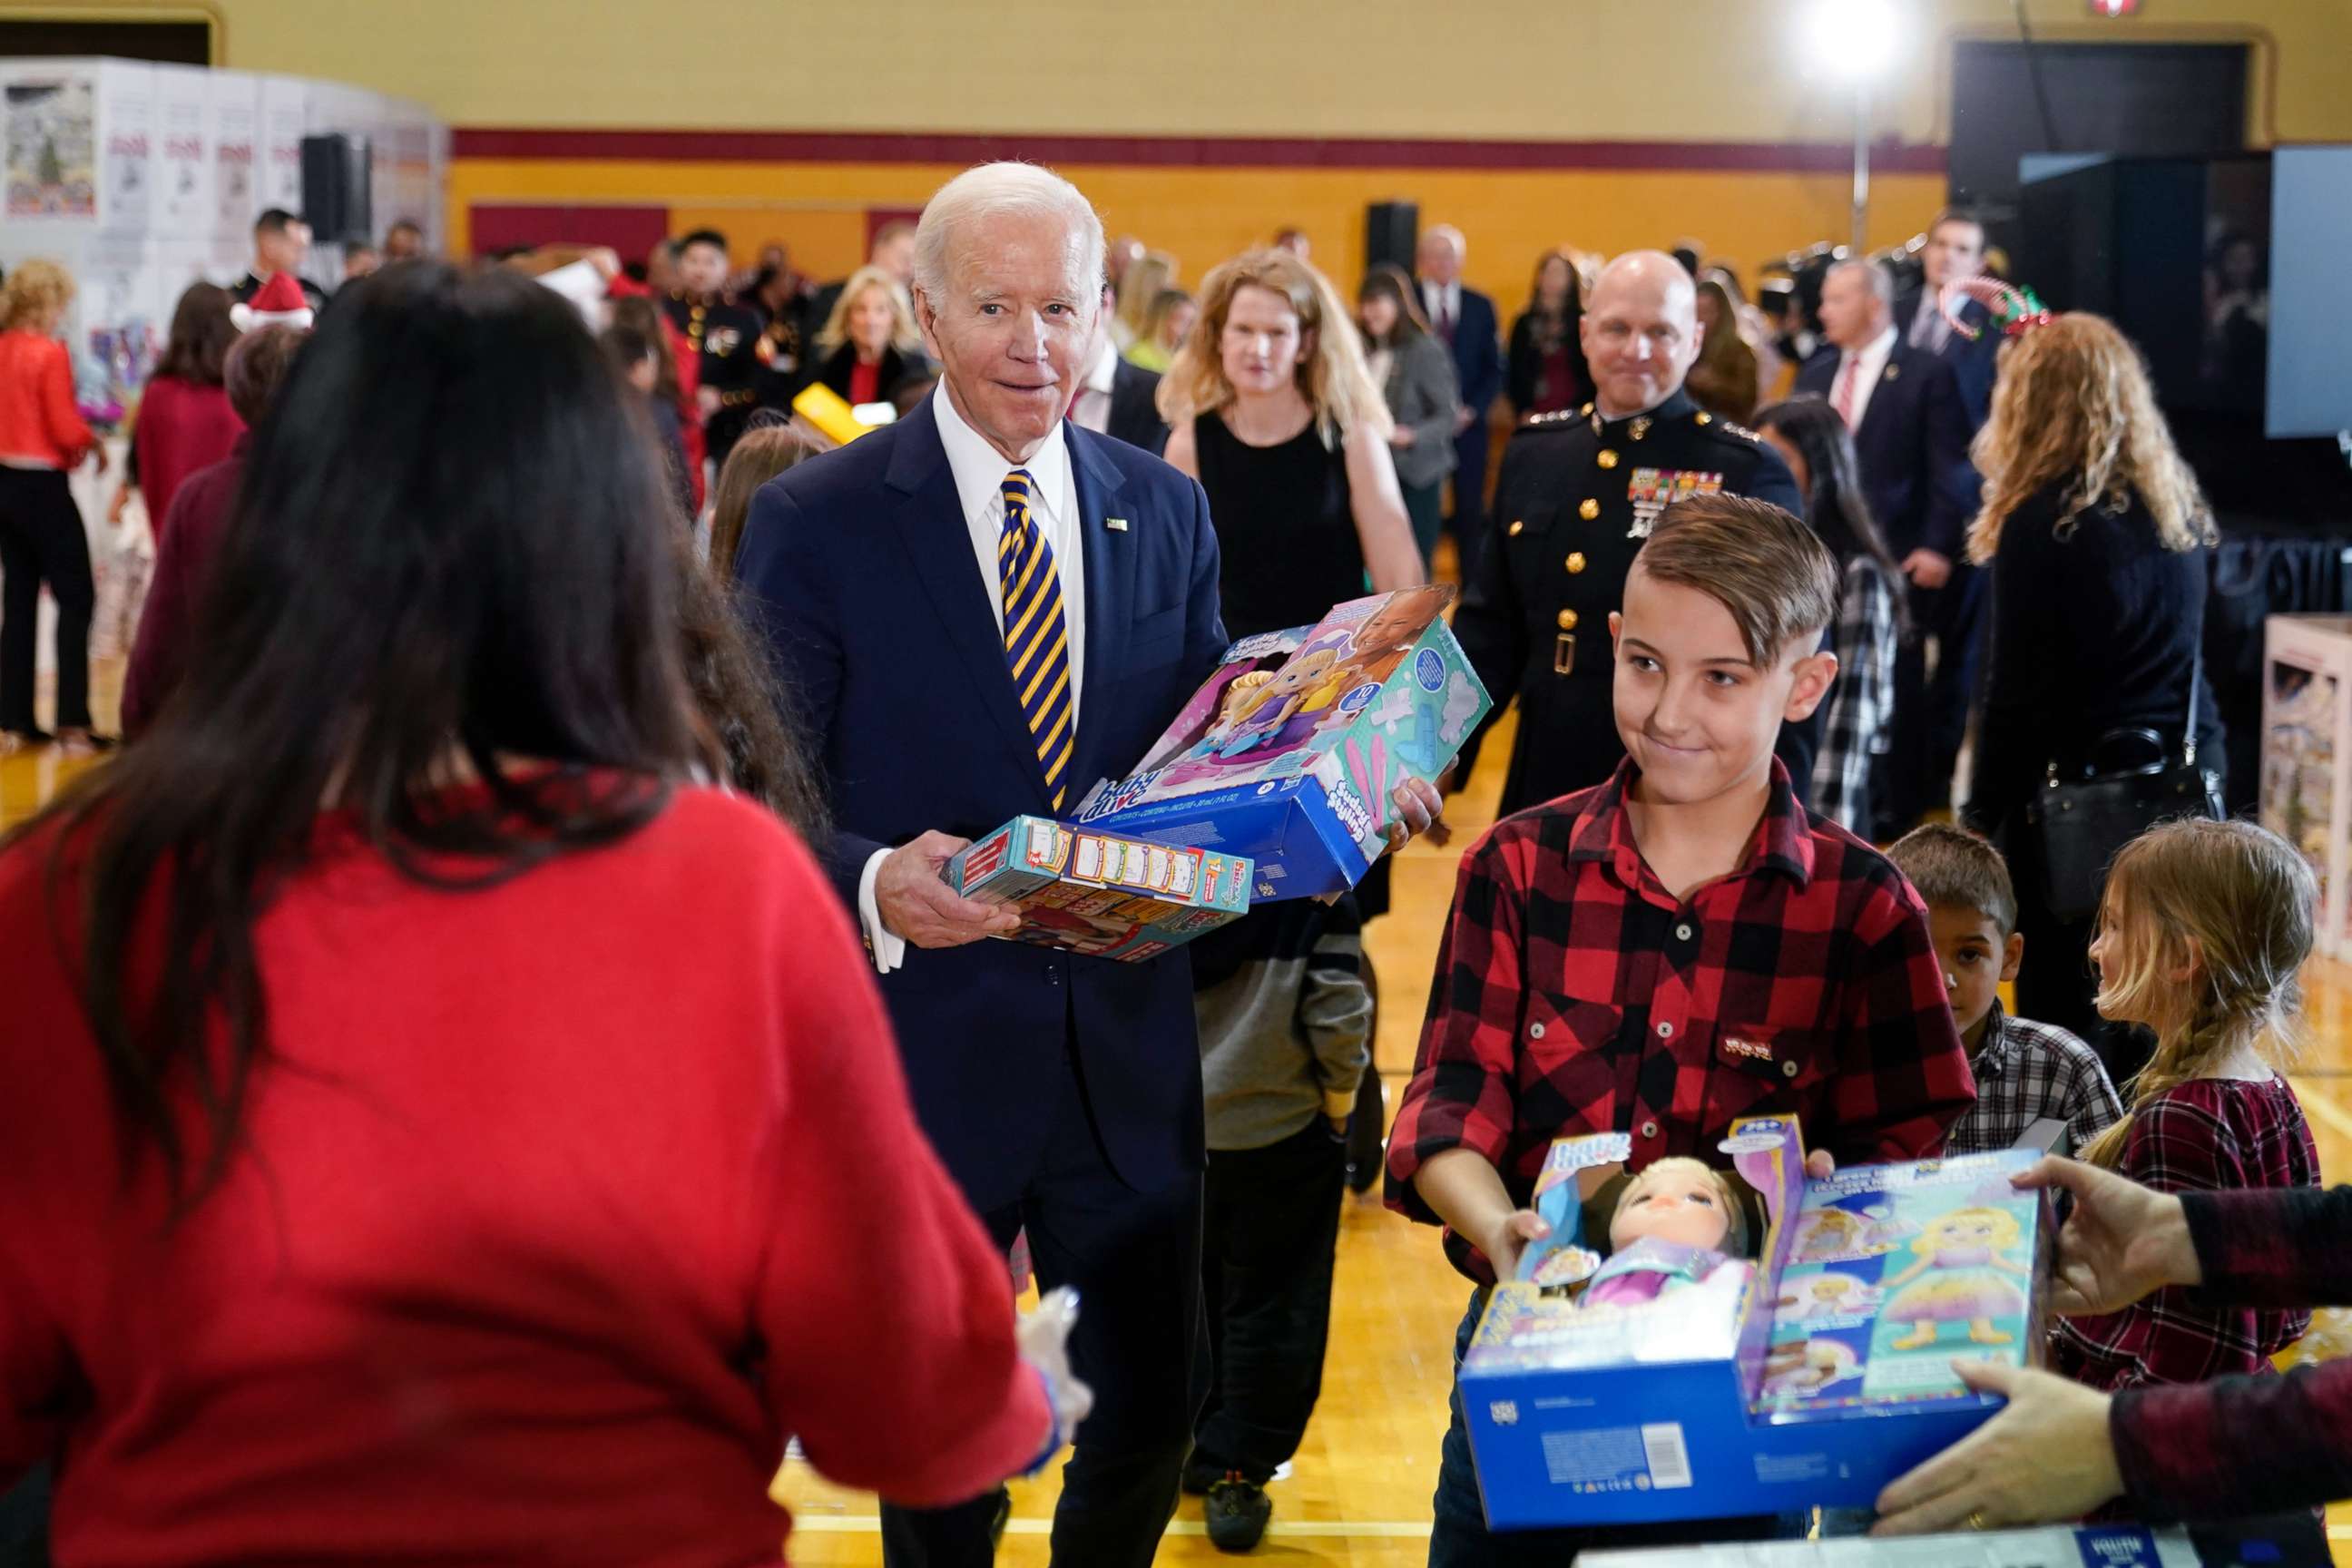 PHOTO: President Joe Biden helps children move donated toys to bins during a Toys for Tots event at Joint Base Myer-Henderson Hall in Arlington, Va., on Dec. 12, 2022. 